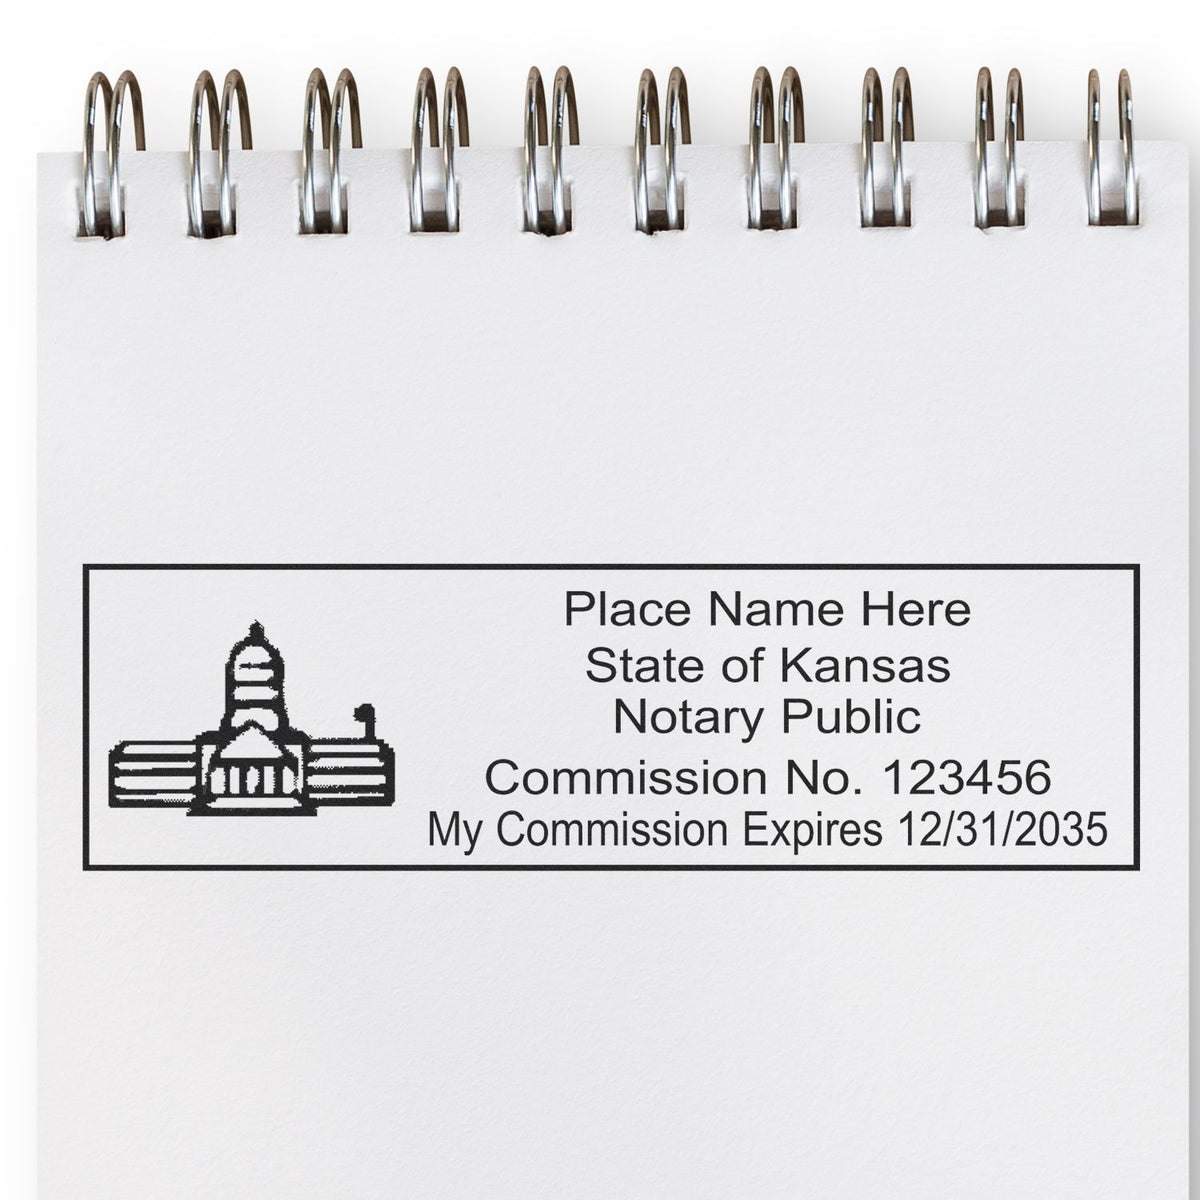 A photograph of the Wooden Handle Kansas State Seal Notary Public Stamp stamp impression reveals a vivid, professional image of the on paper.